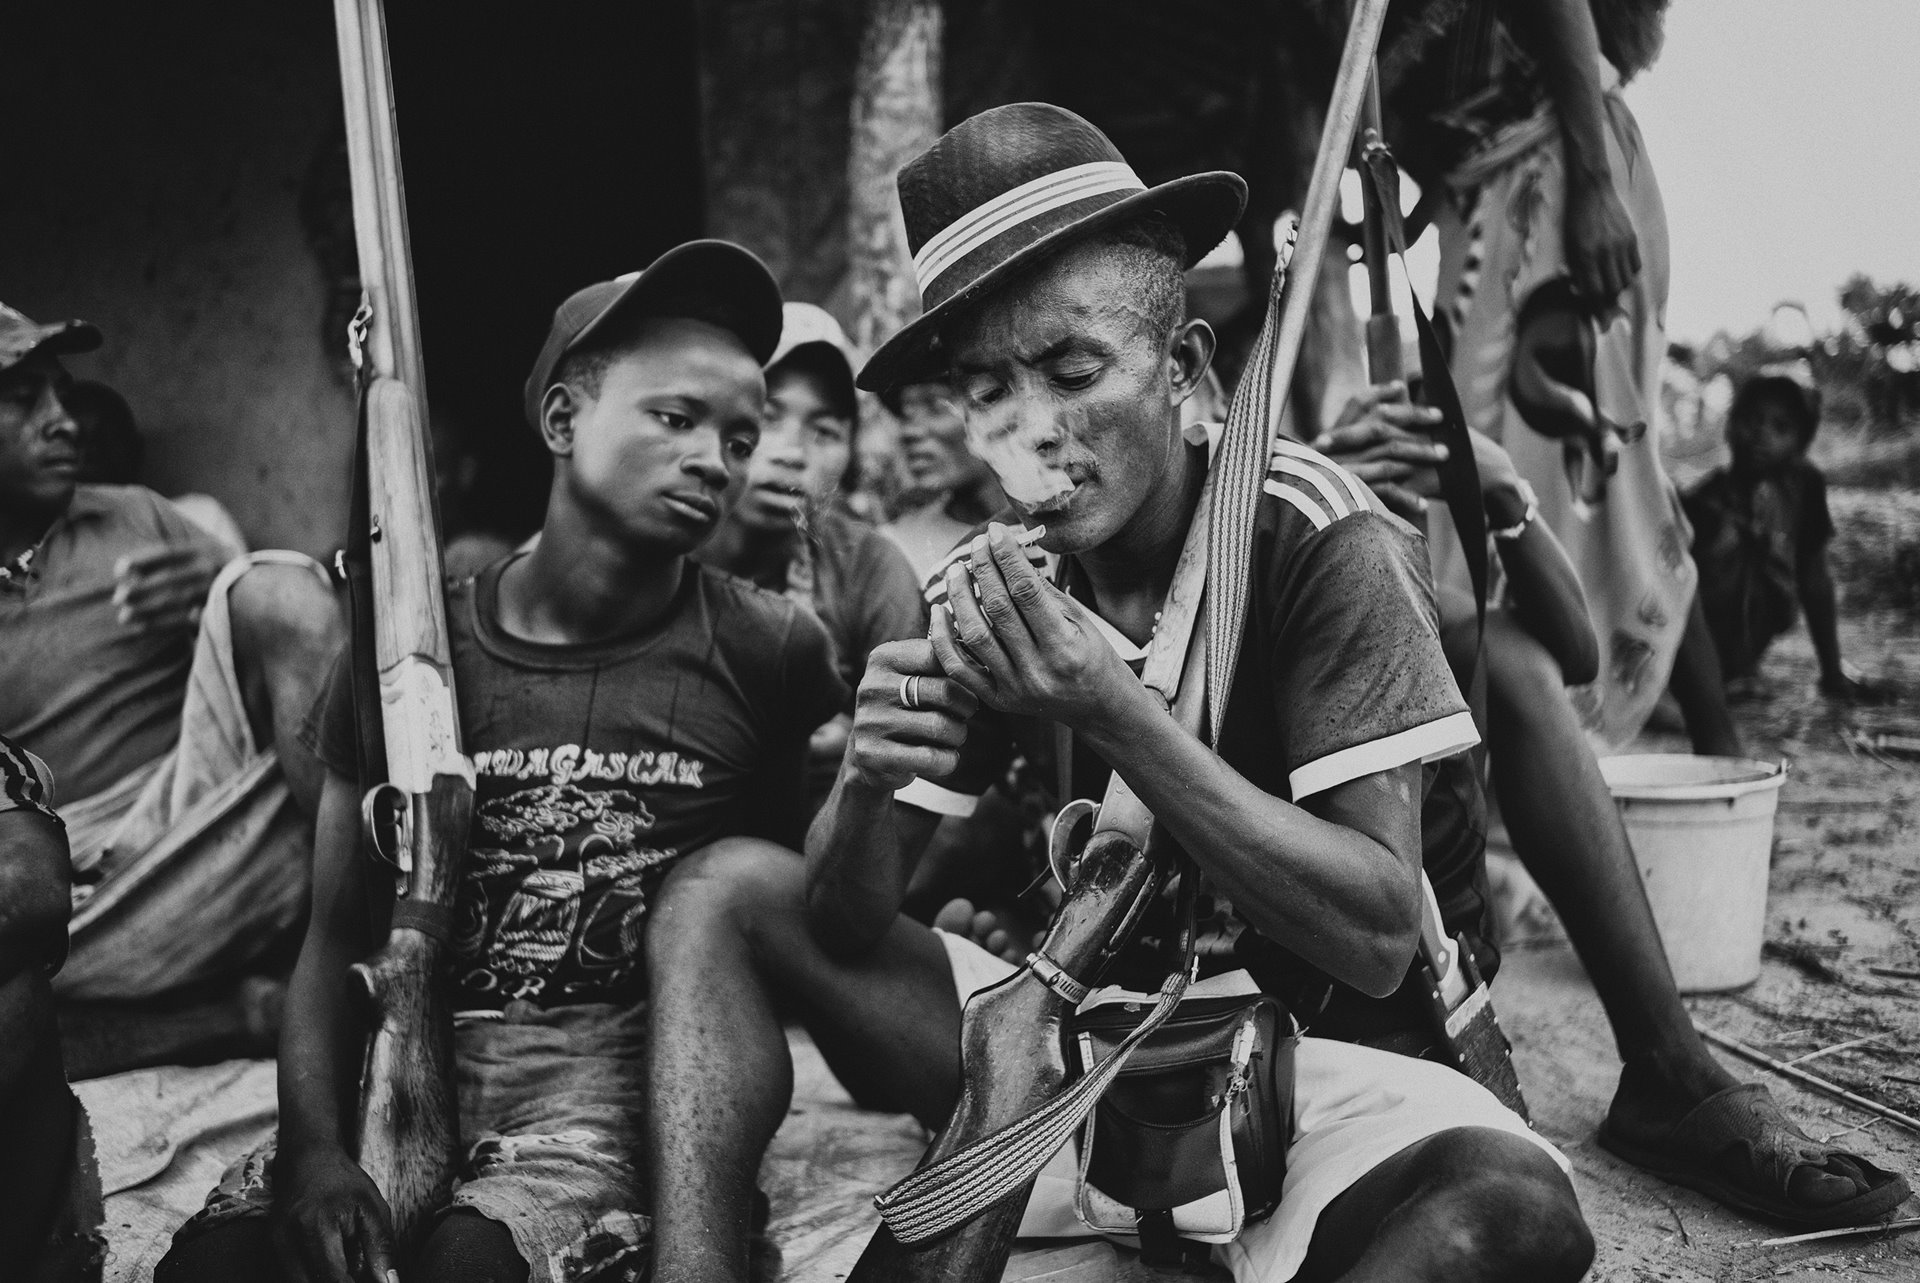 <p>Men smoke local tobacco in the village of Mataviakoho in west-central Madagascar. The village is reputed to be the base of the notorious head of a group of dahalo cattle thieves.</p>
